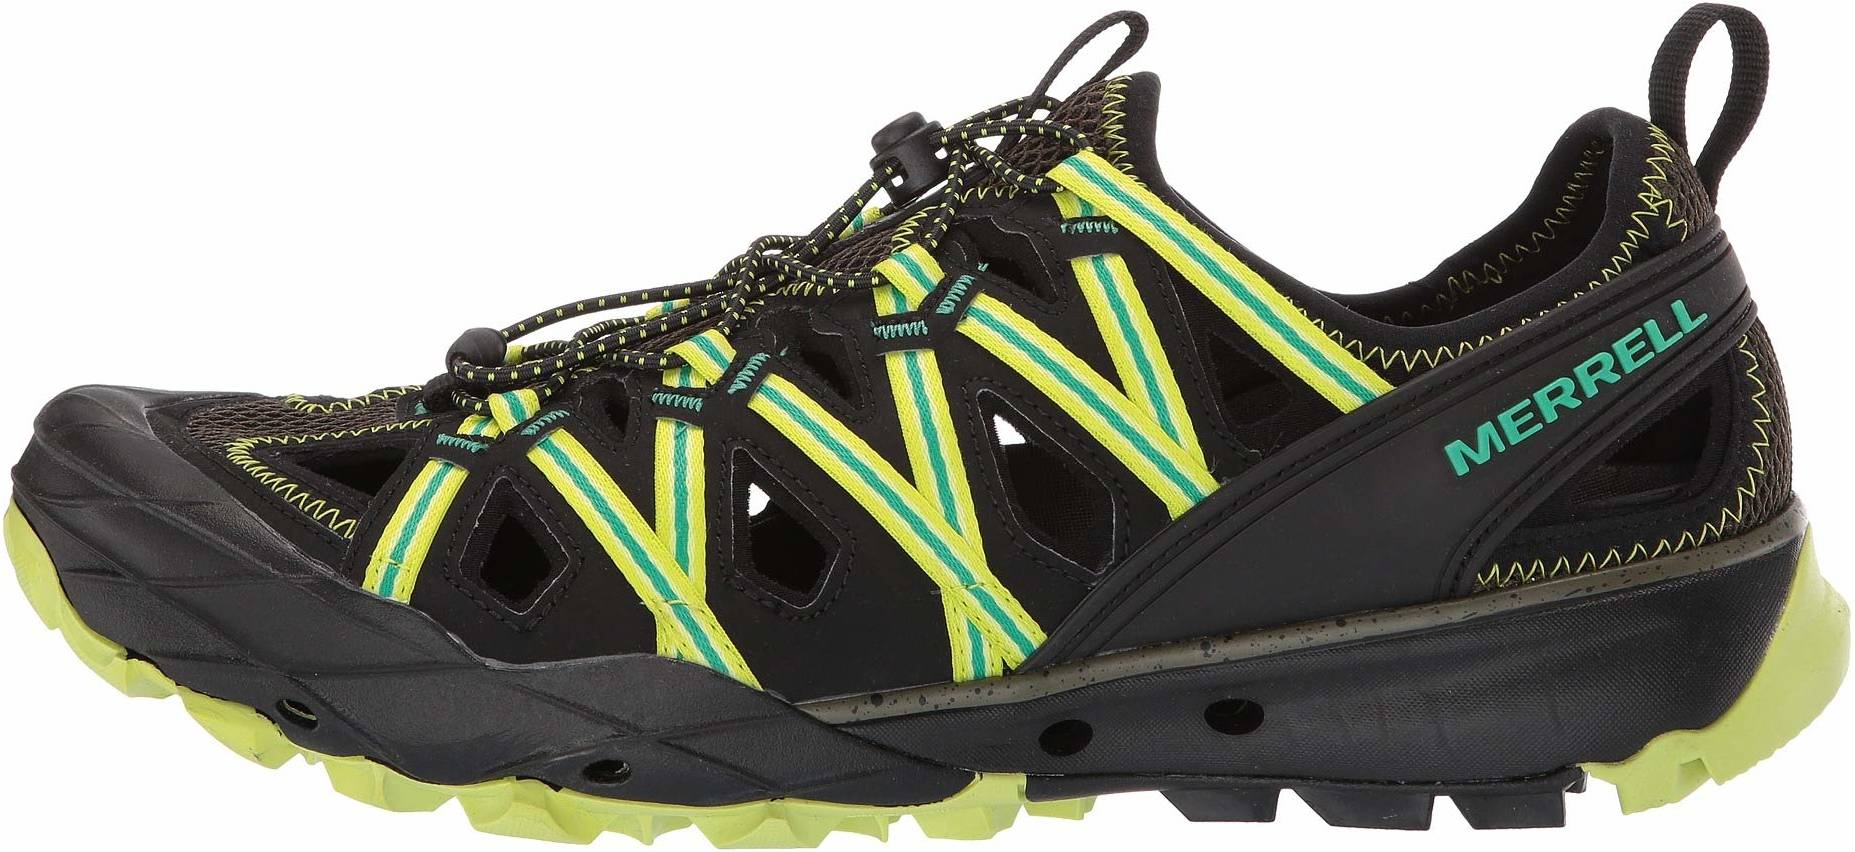 Merrell Mens Choprock Strap Shoes Sandals Black Sports Outdoors Breathable